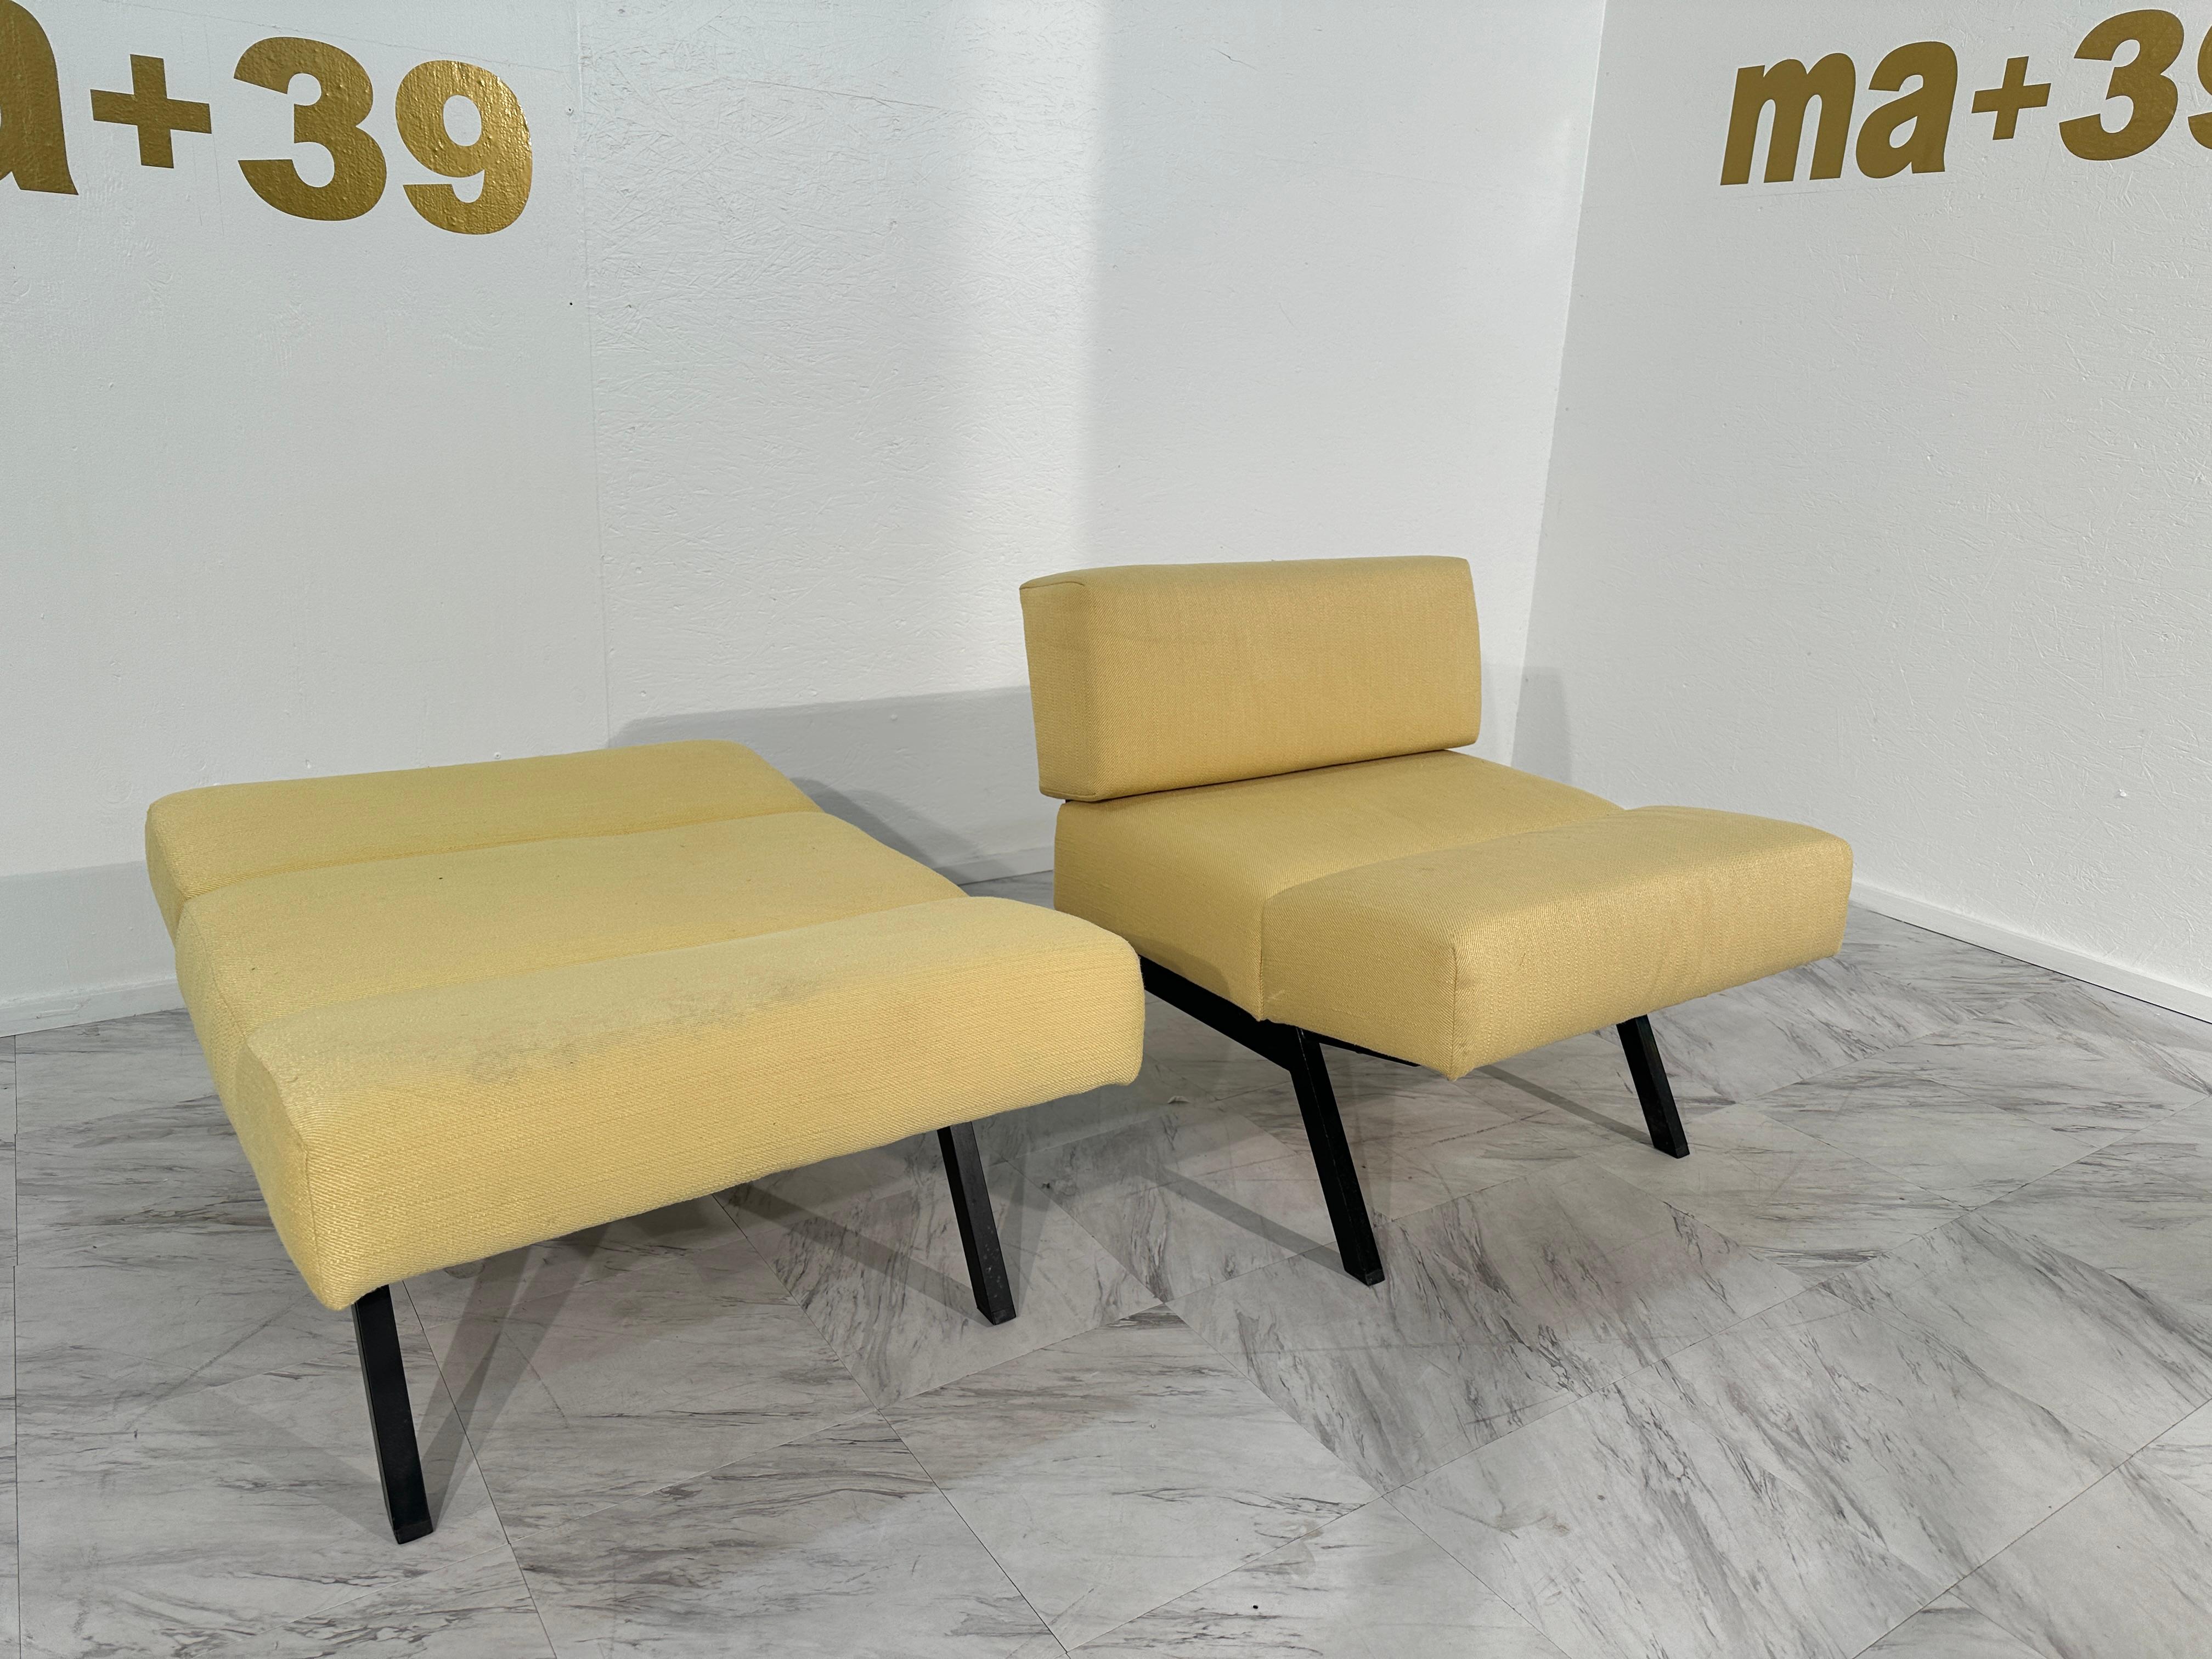 Italian Set of 2 Panchetto Lounge Chairs Designed by Rito Valla for IPE Bologna 1960s For Sale